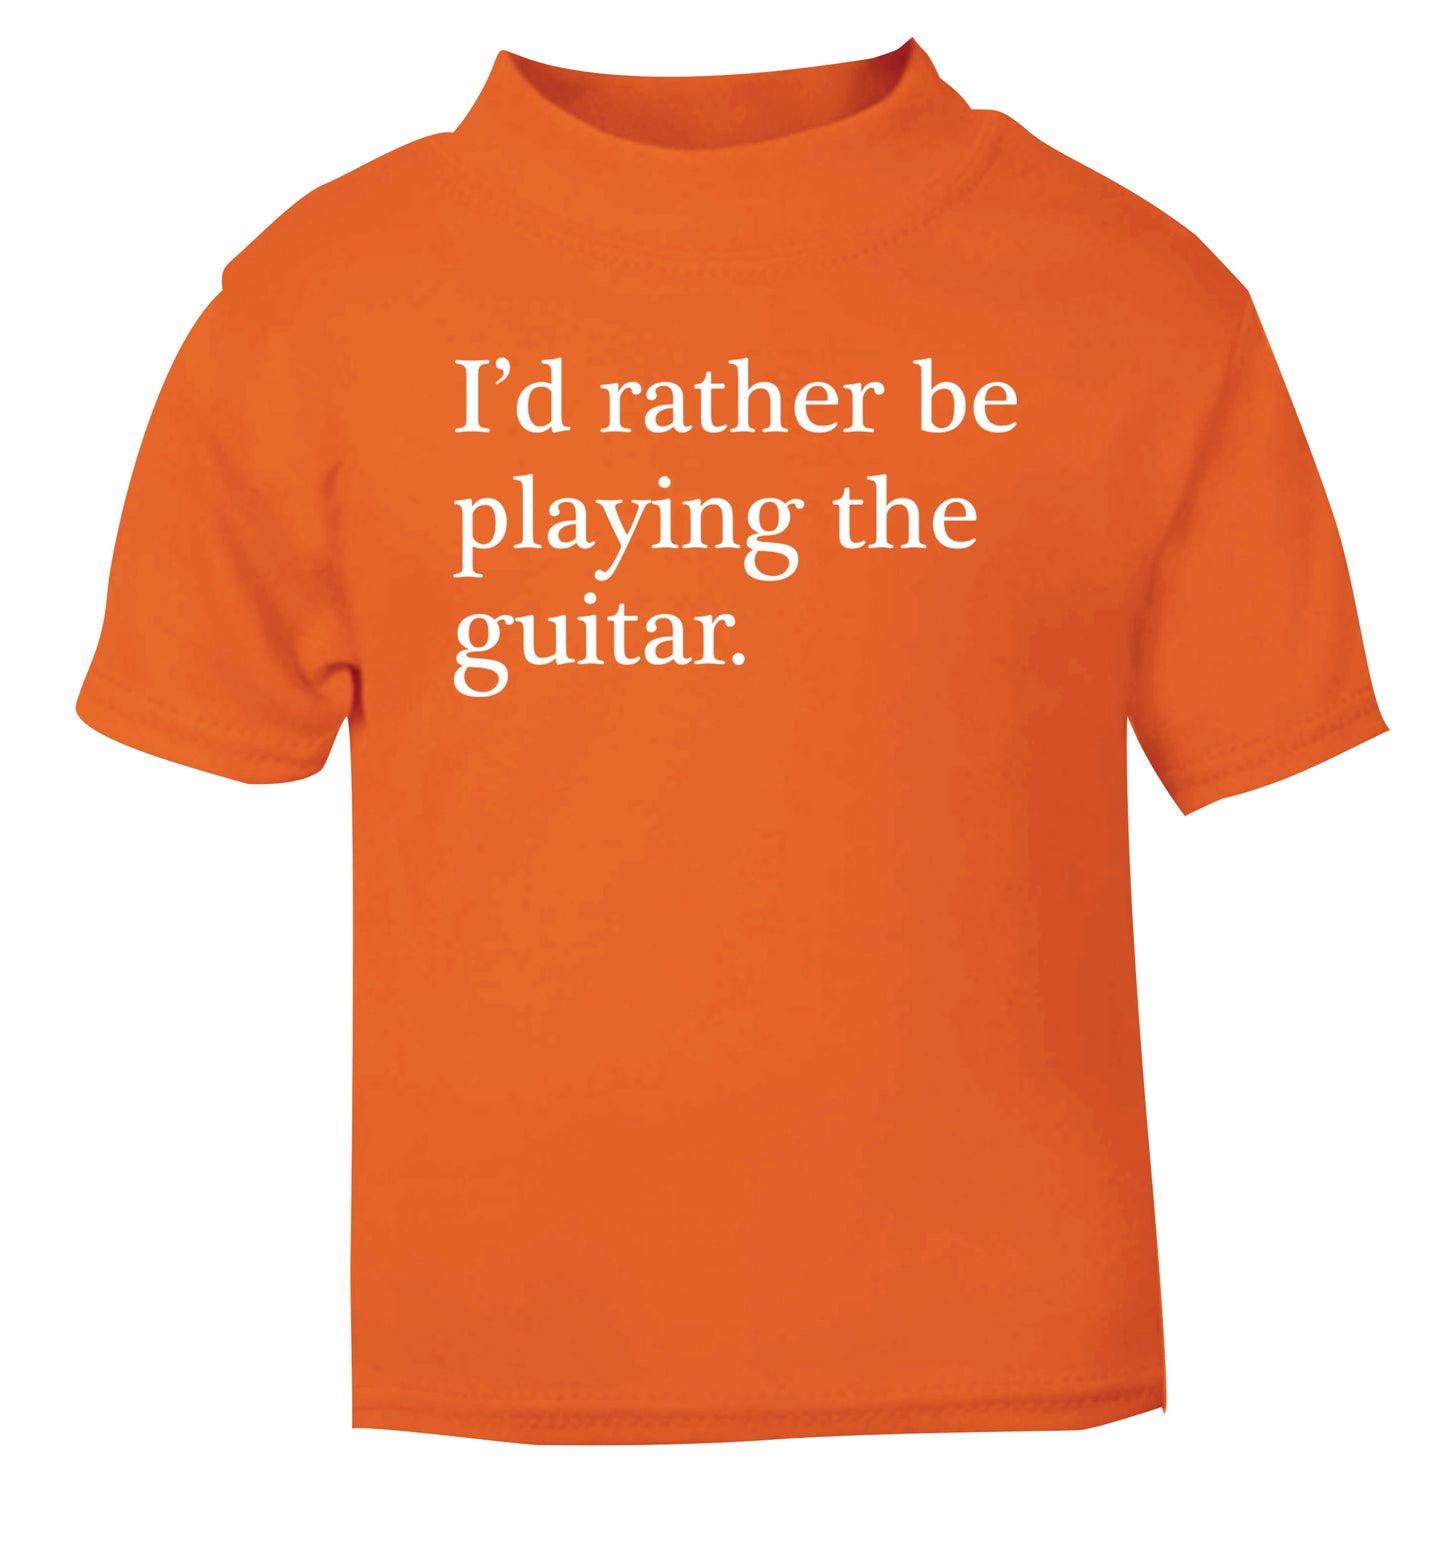 I'd rather be playing the guitar orange Baby Toddler Tshirt 2 Years